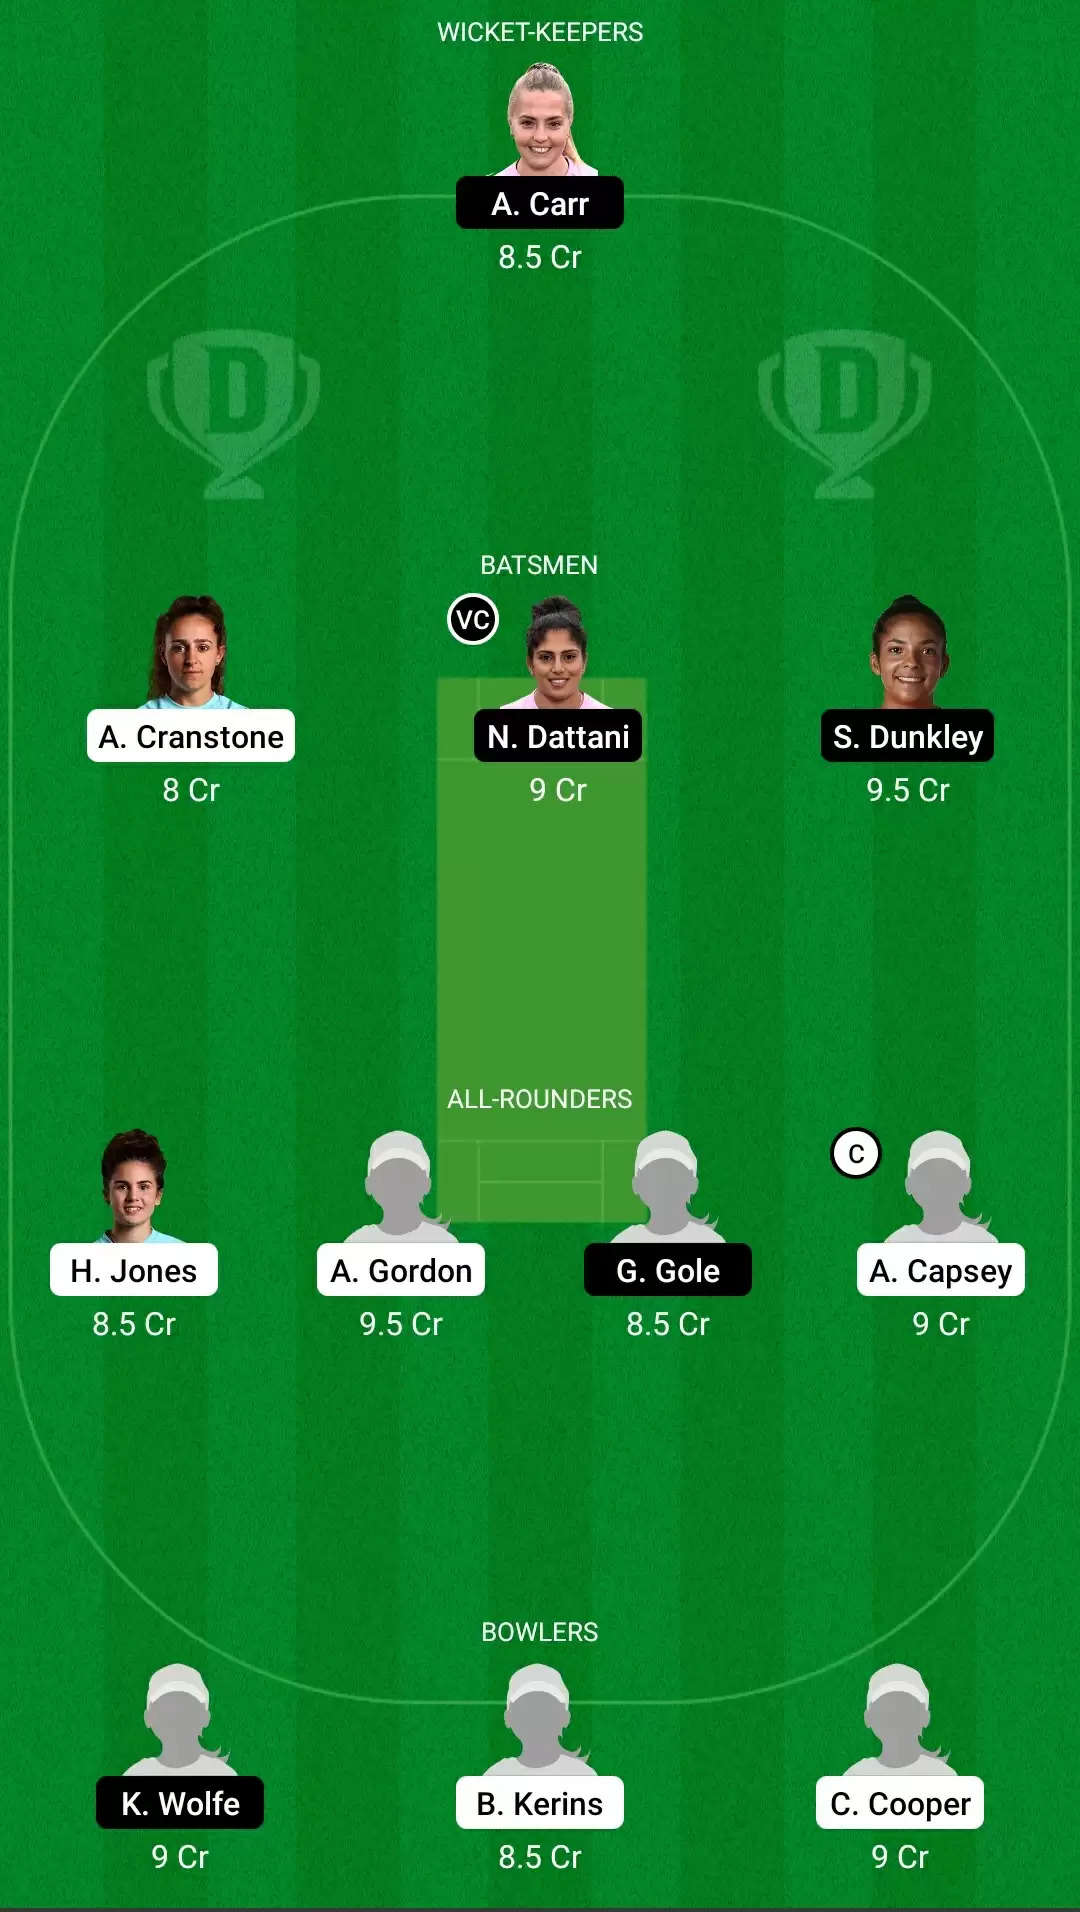 Women’s County Championship T20 2021, Match 2: SUR-W vs MID-W Dream11 Prediction, Fantasy Cricket Tips, Team, Playing 11, Pitch Report, Weather Conditions and Injury Update